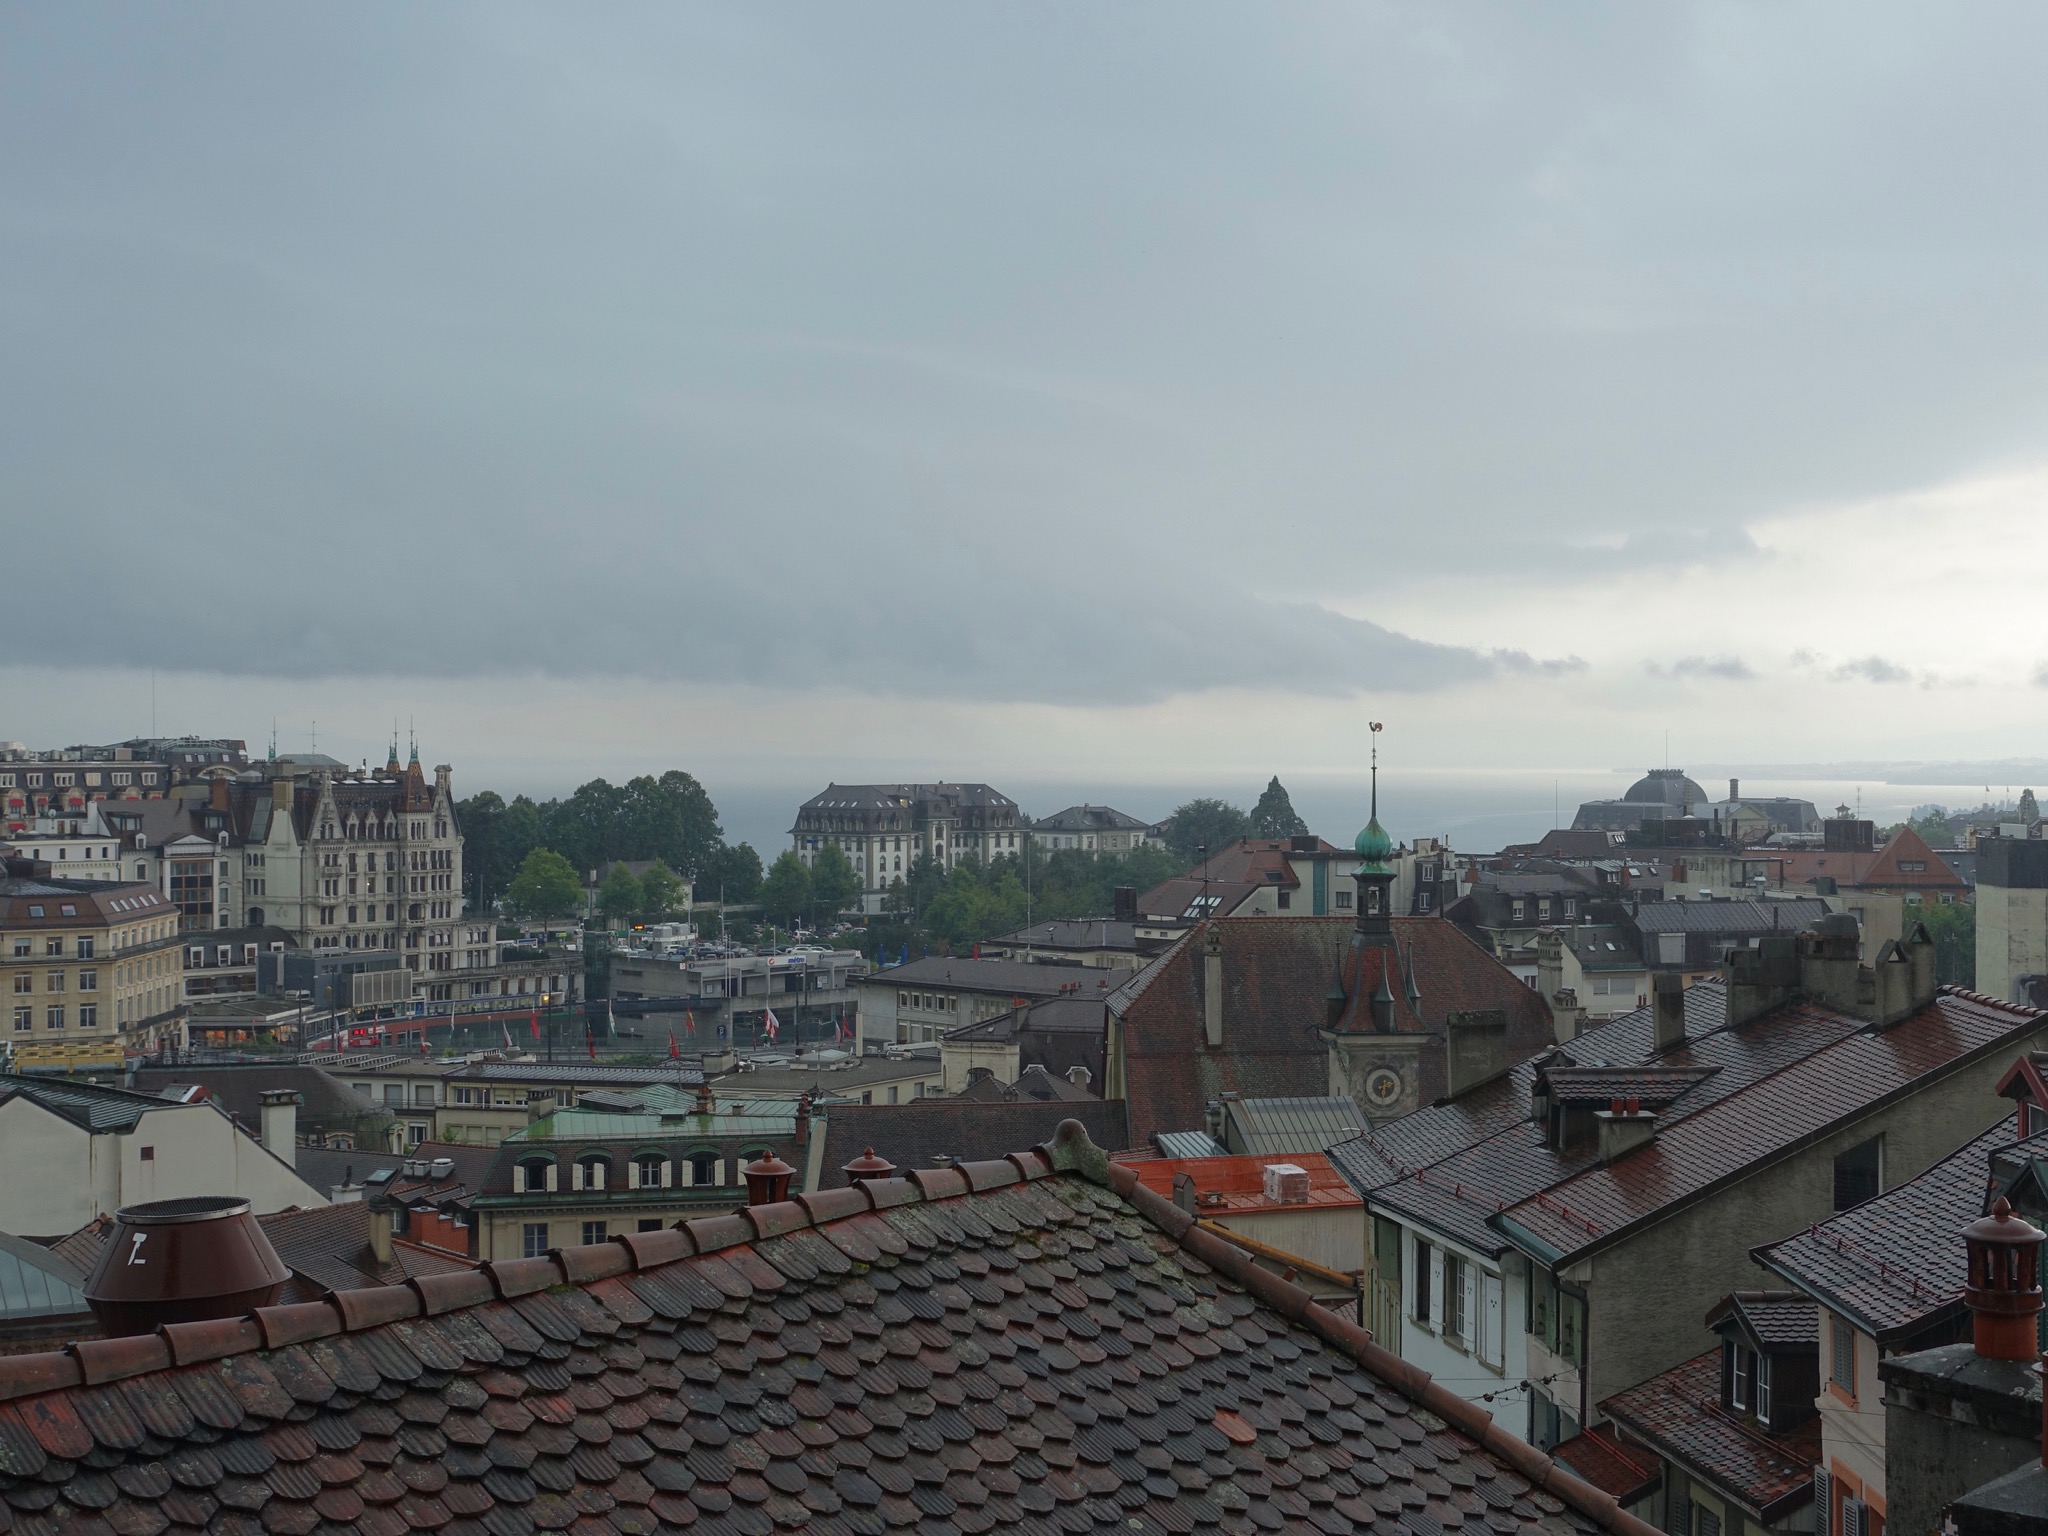 Photo 5 of 45 from the album Day Trip to Morges/Lausanne/Bern.